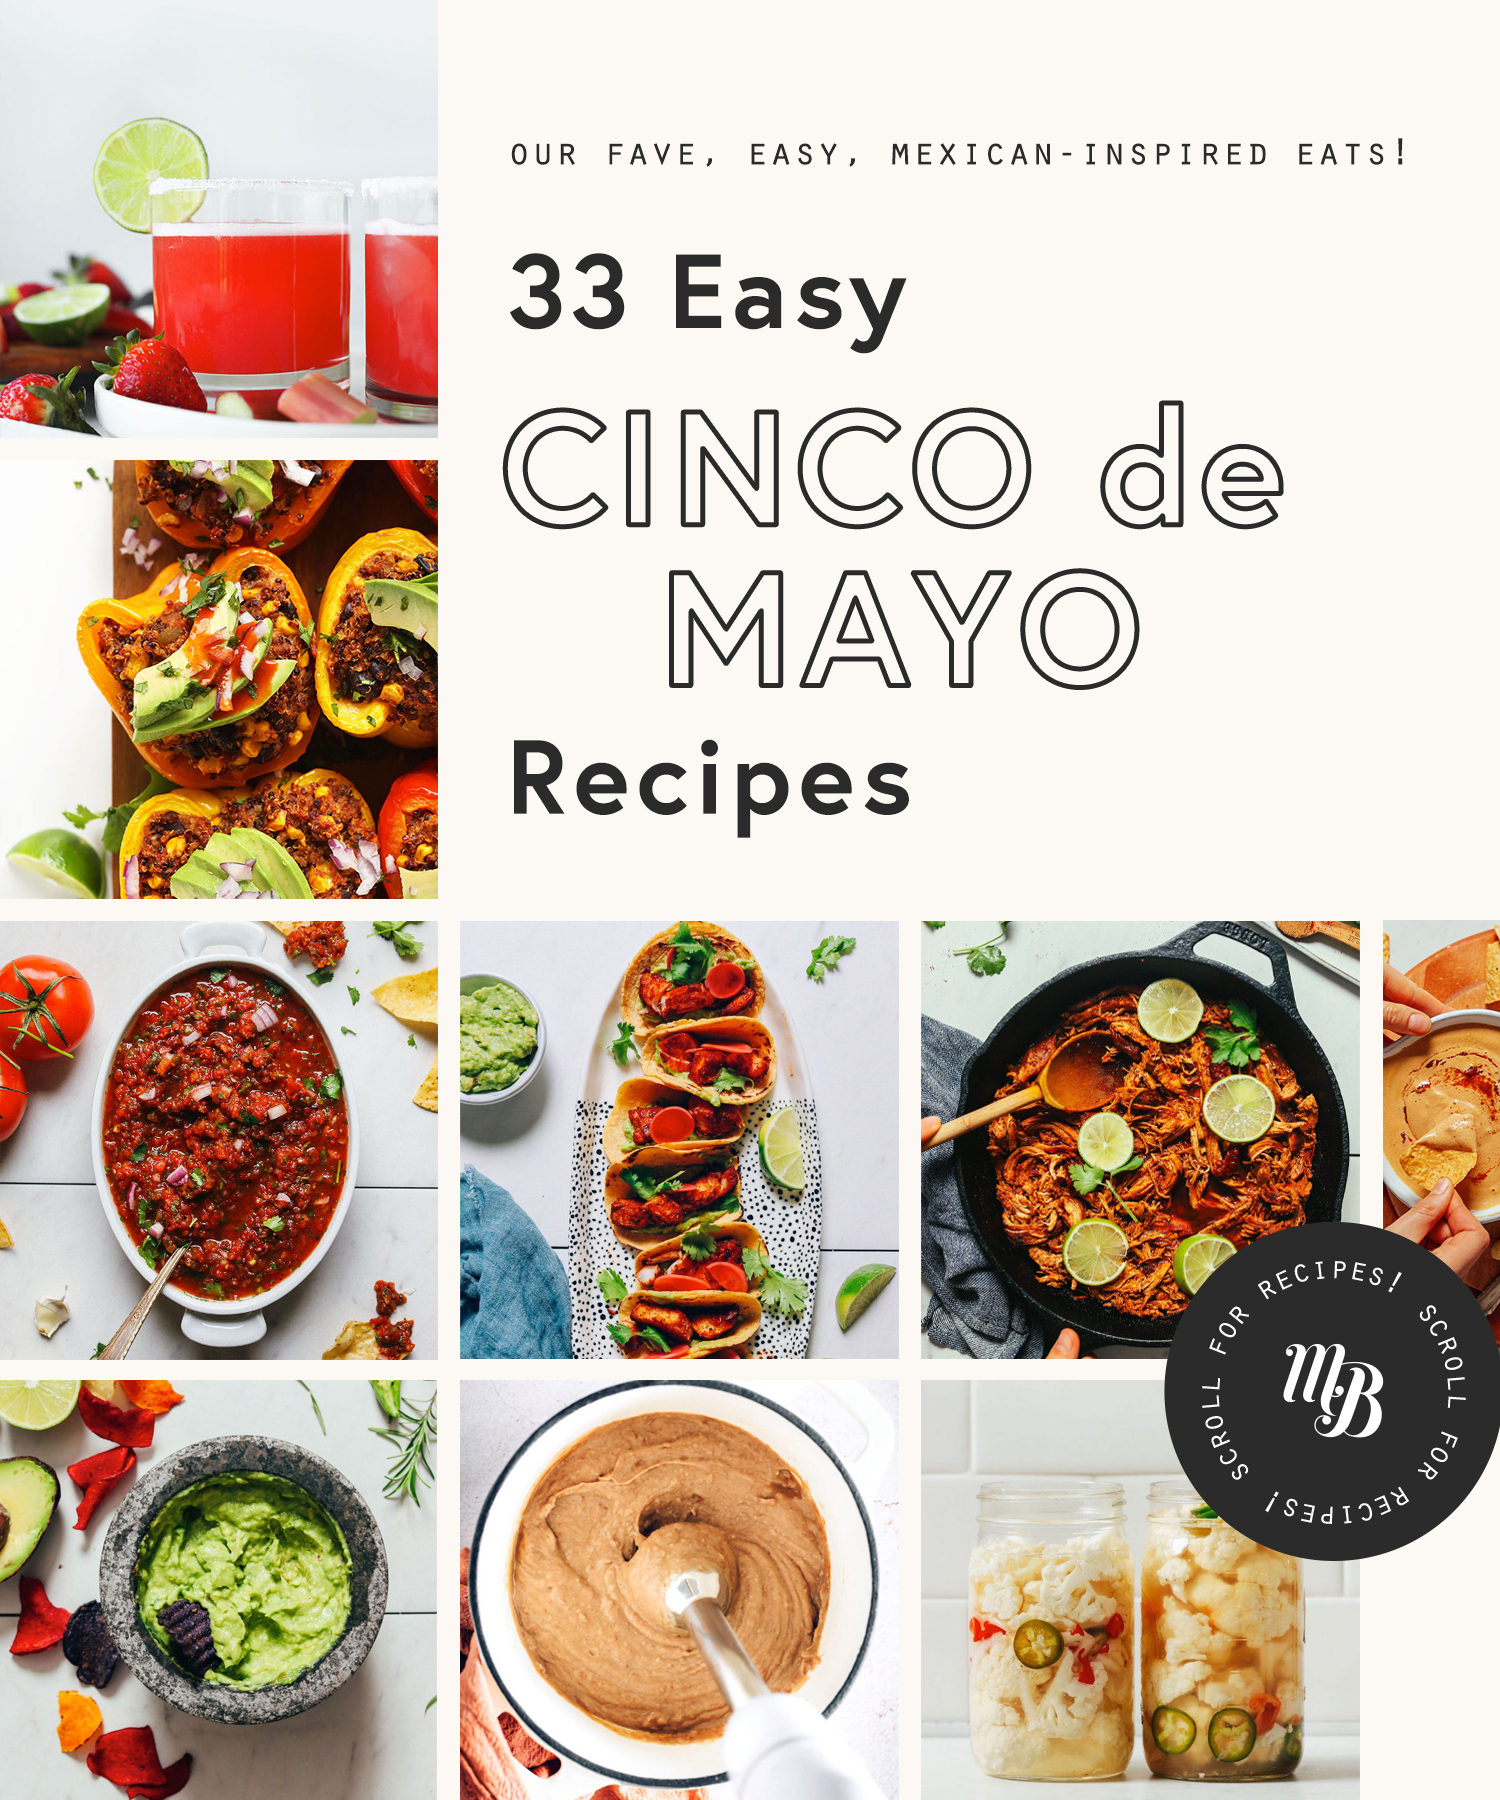 Margaritas, stuffed peppers, salsa, tacos, and other recipes perfect for cinco de mayo